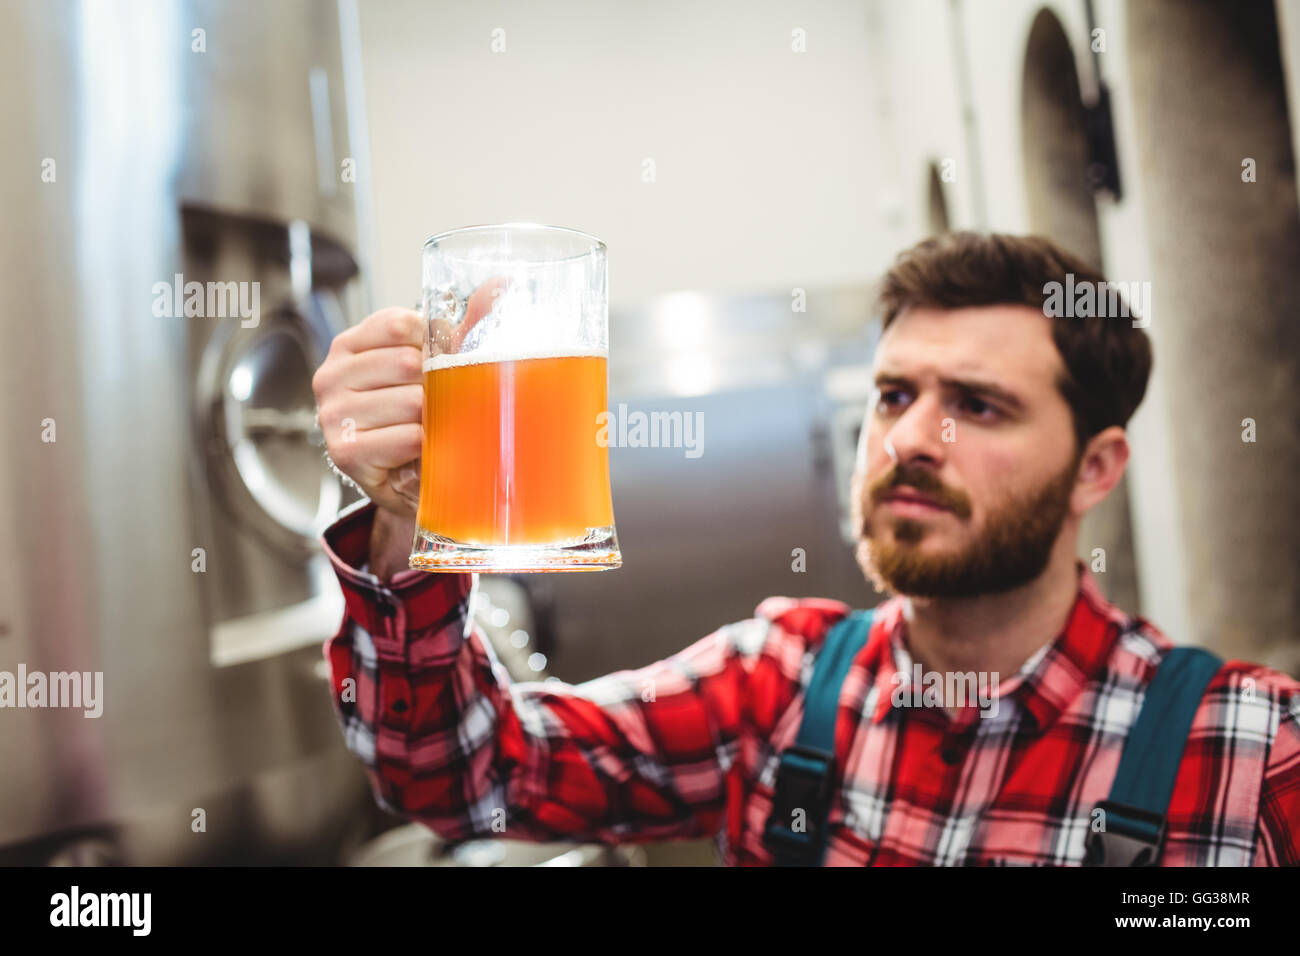 Manufacturer examining beer in jug at brewery Stock Photo